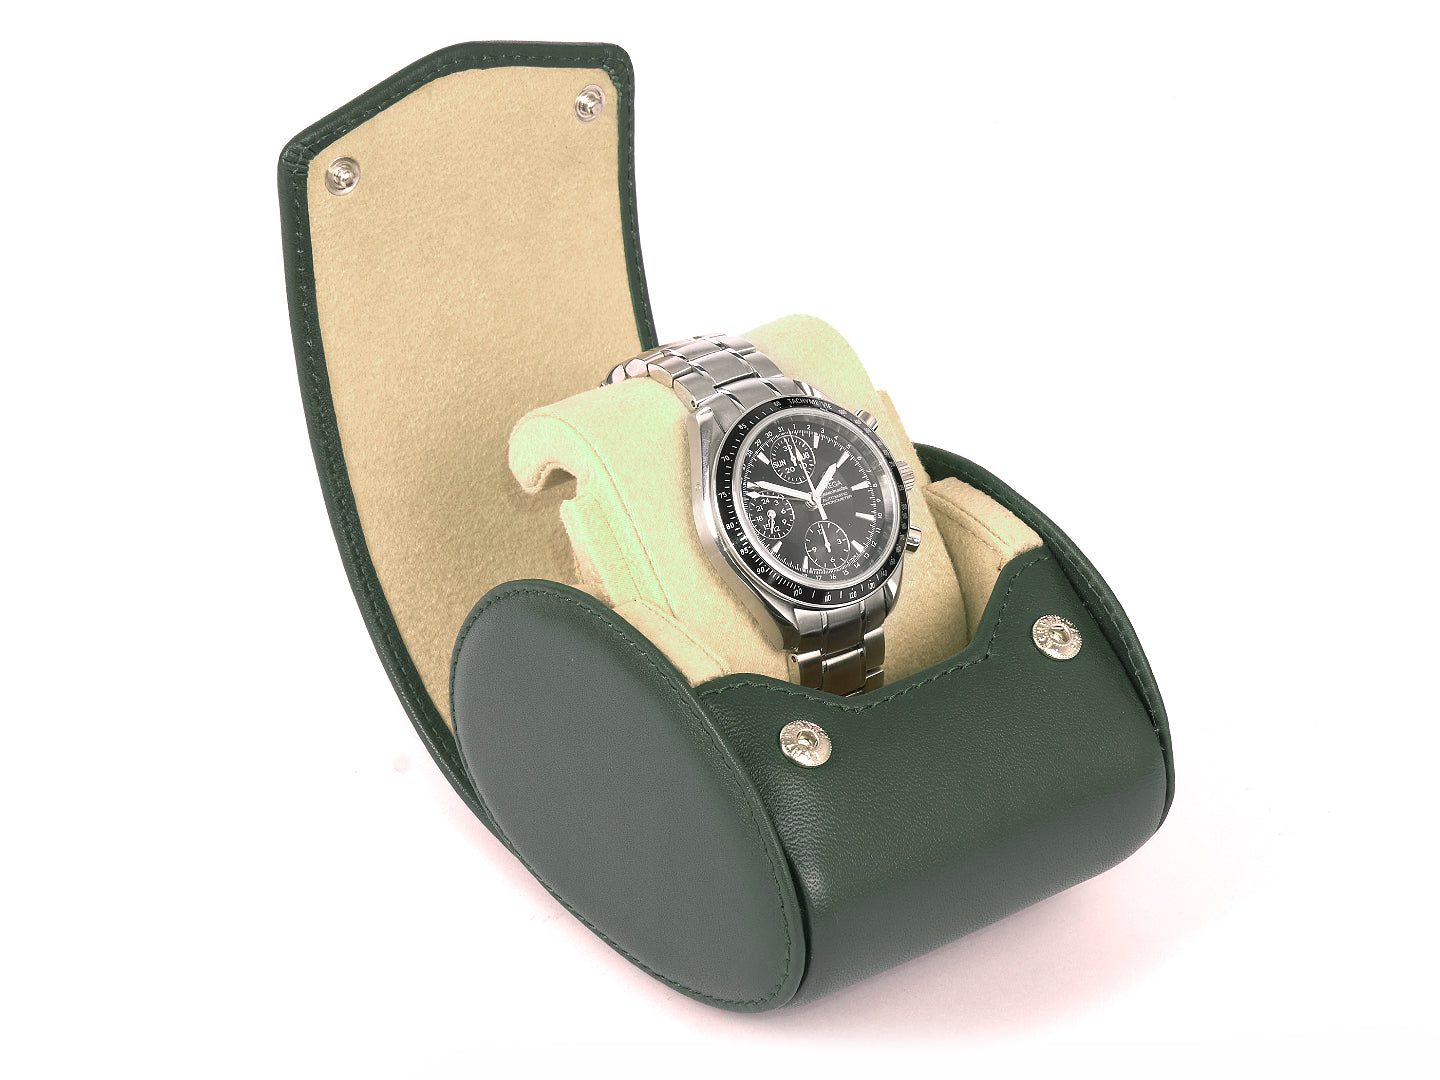 1_Watch_Travel_Watch_Green_Leather_closed_1_Carapaz